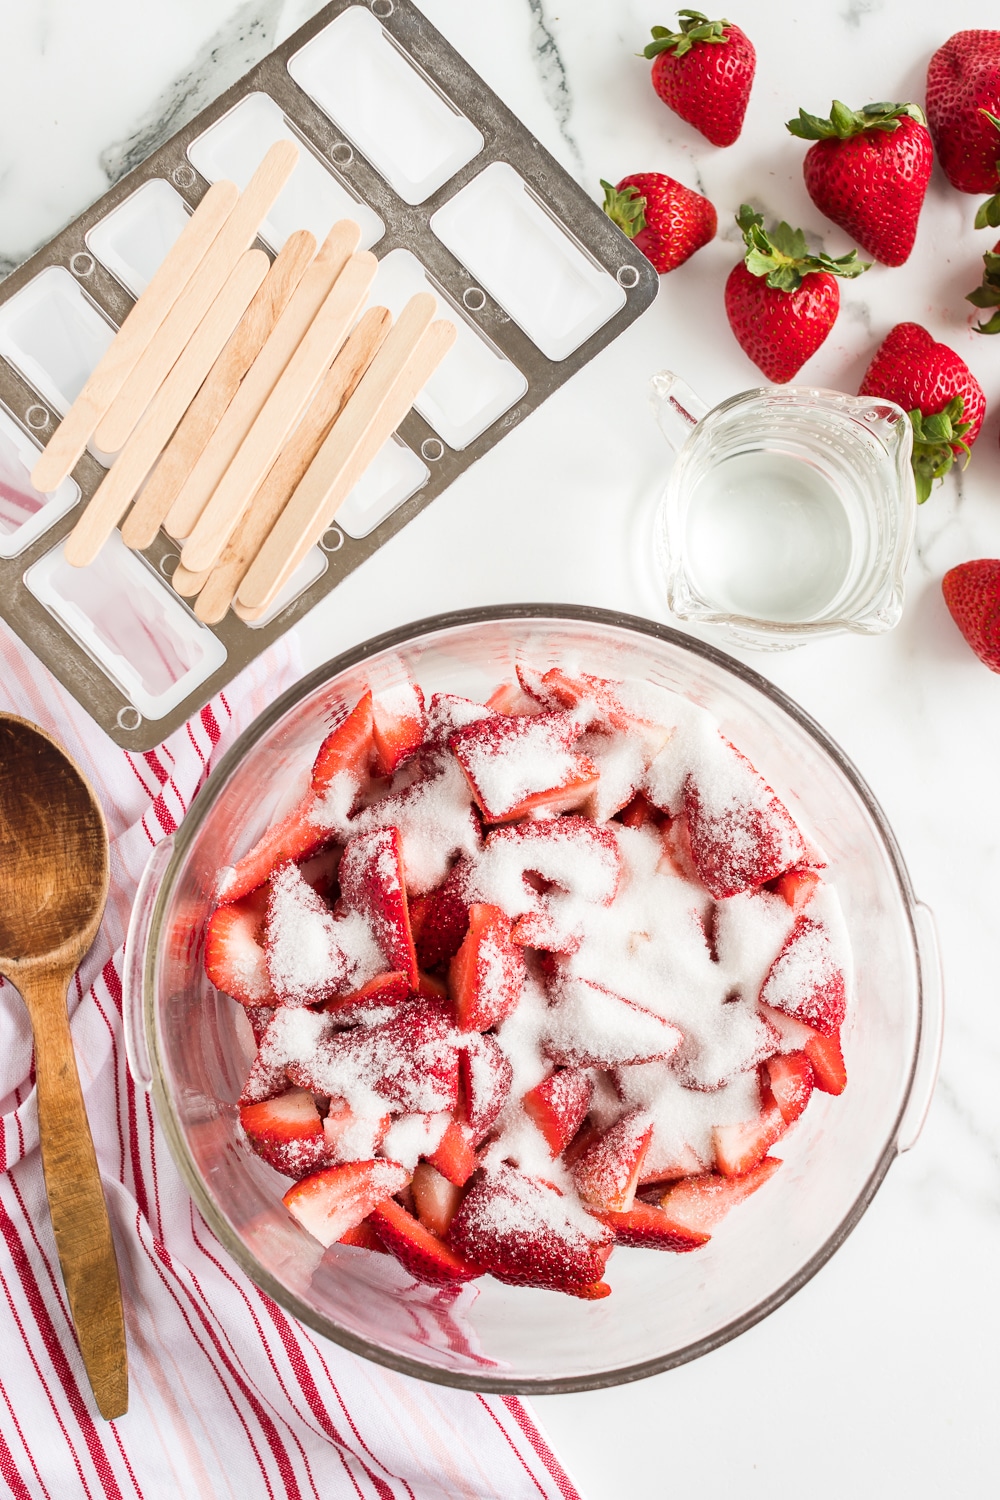 Strawberry popsicles with fresh or frozen strawberries